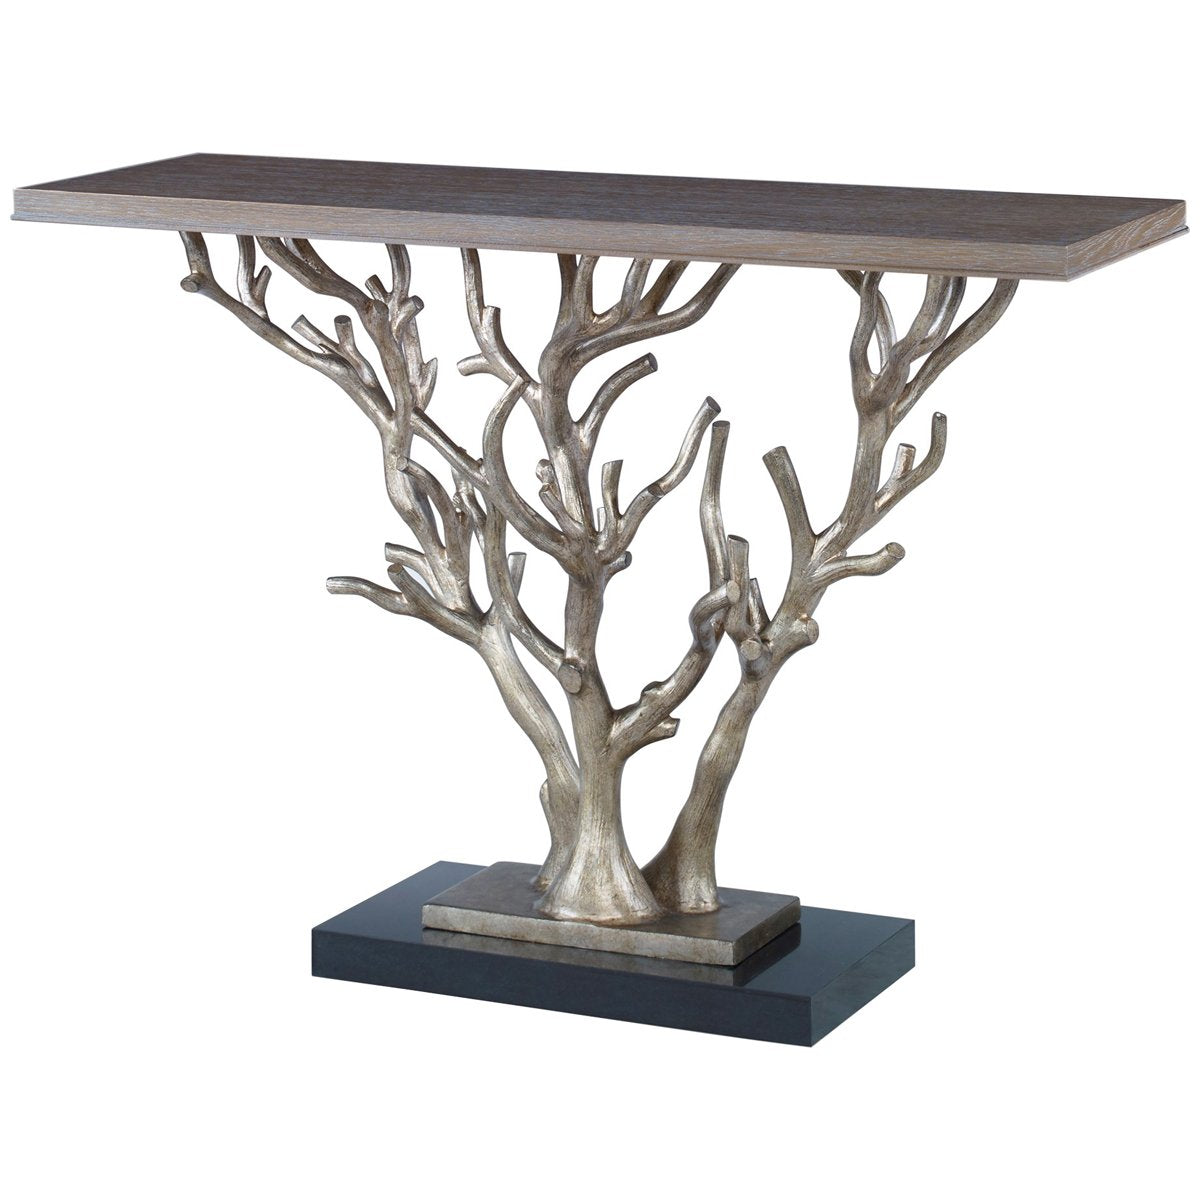 Ambella Home Woodland Console Table